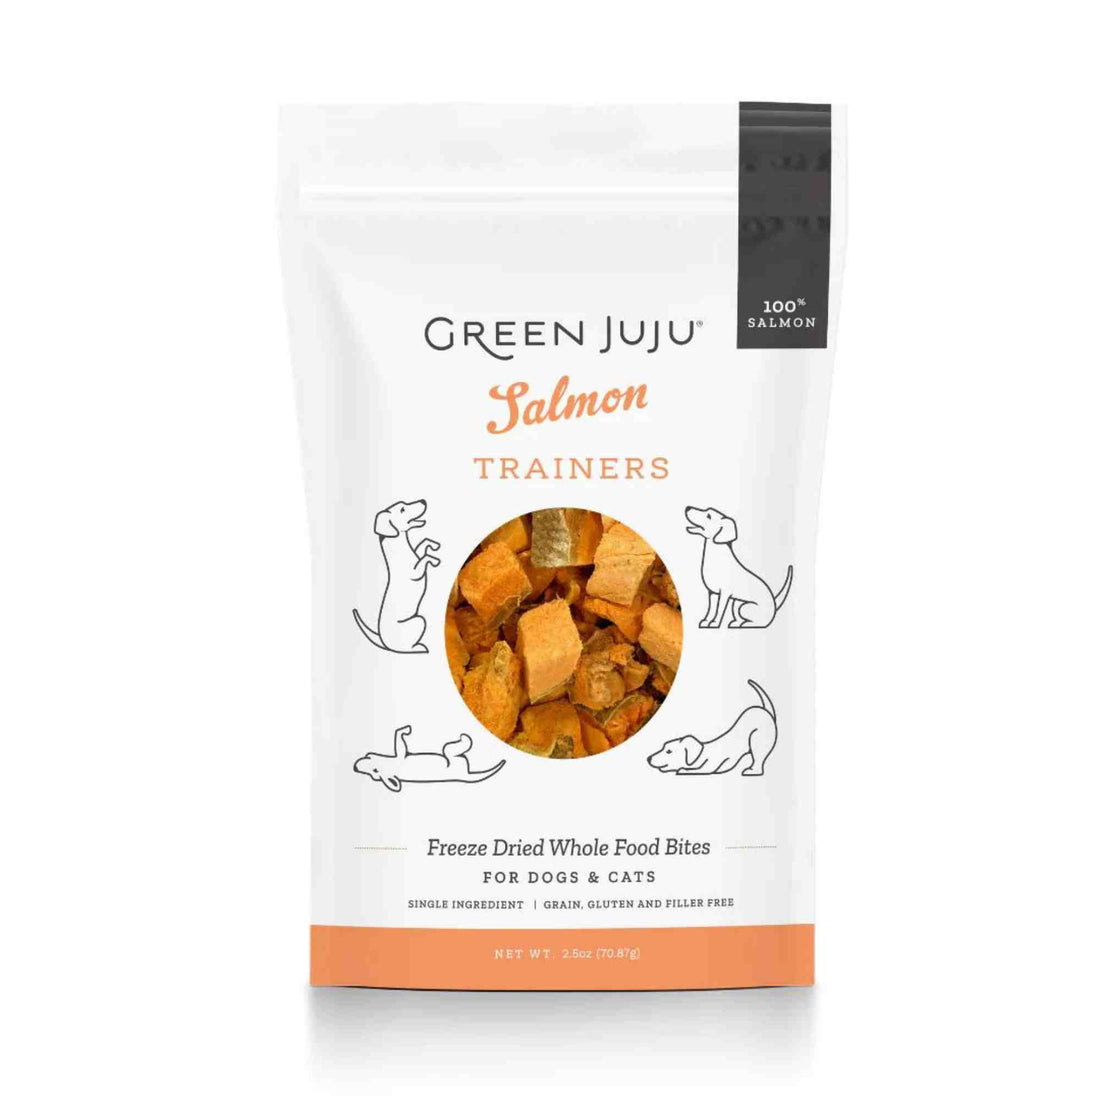 Salmon Trainers - Freeze Dried Whole food bites for dogs and cats single ingredient - green juju - front of bag